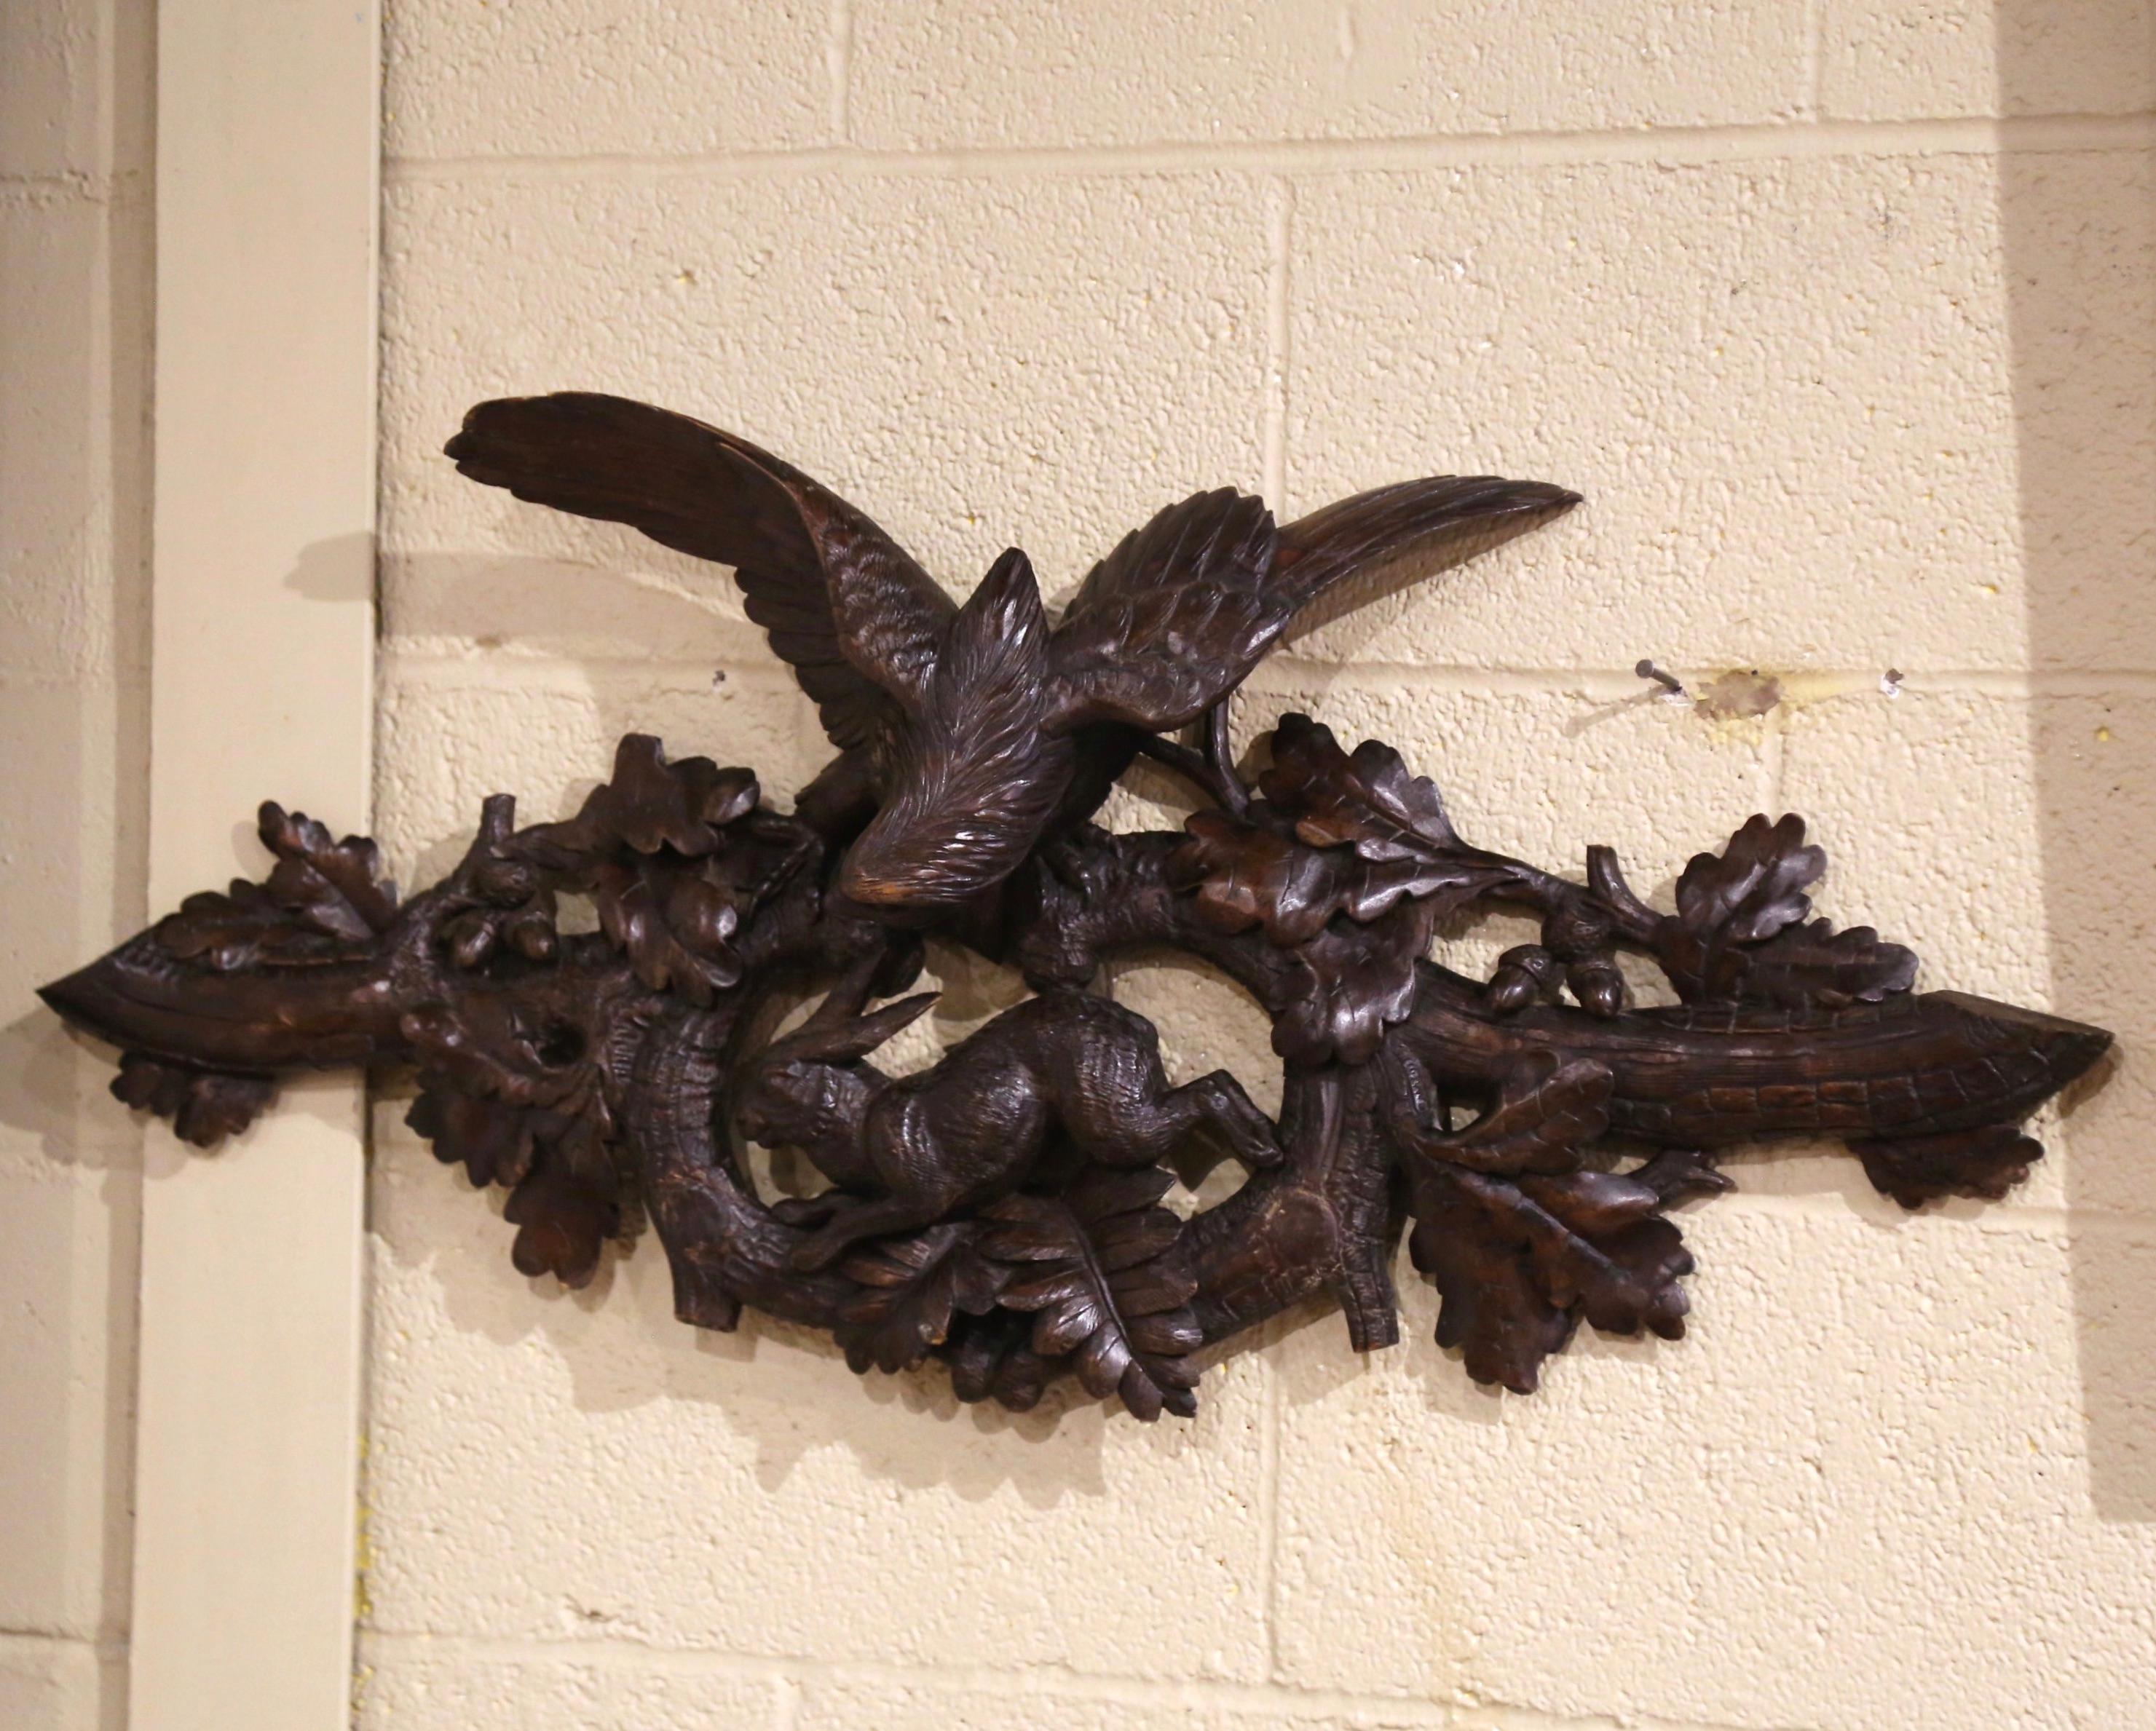 Place this elegant wall hanging decor in a bar area, wine cellar, or above a door in your home or cabin. Created in France, circa 1880, the fruitwood hunting scene features high quality carving, including an eagle with wings extended over a running